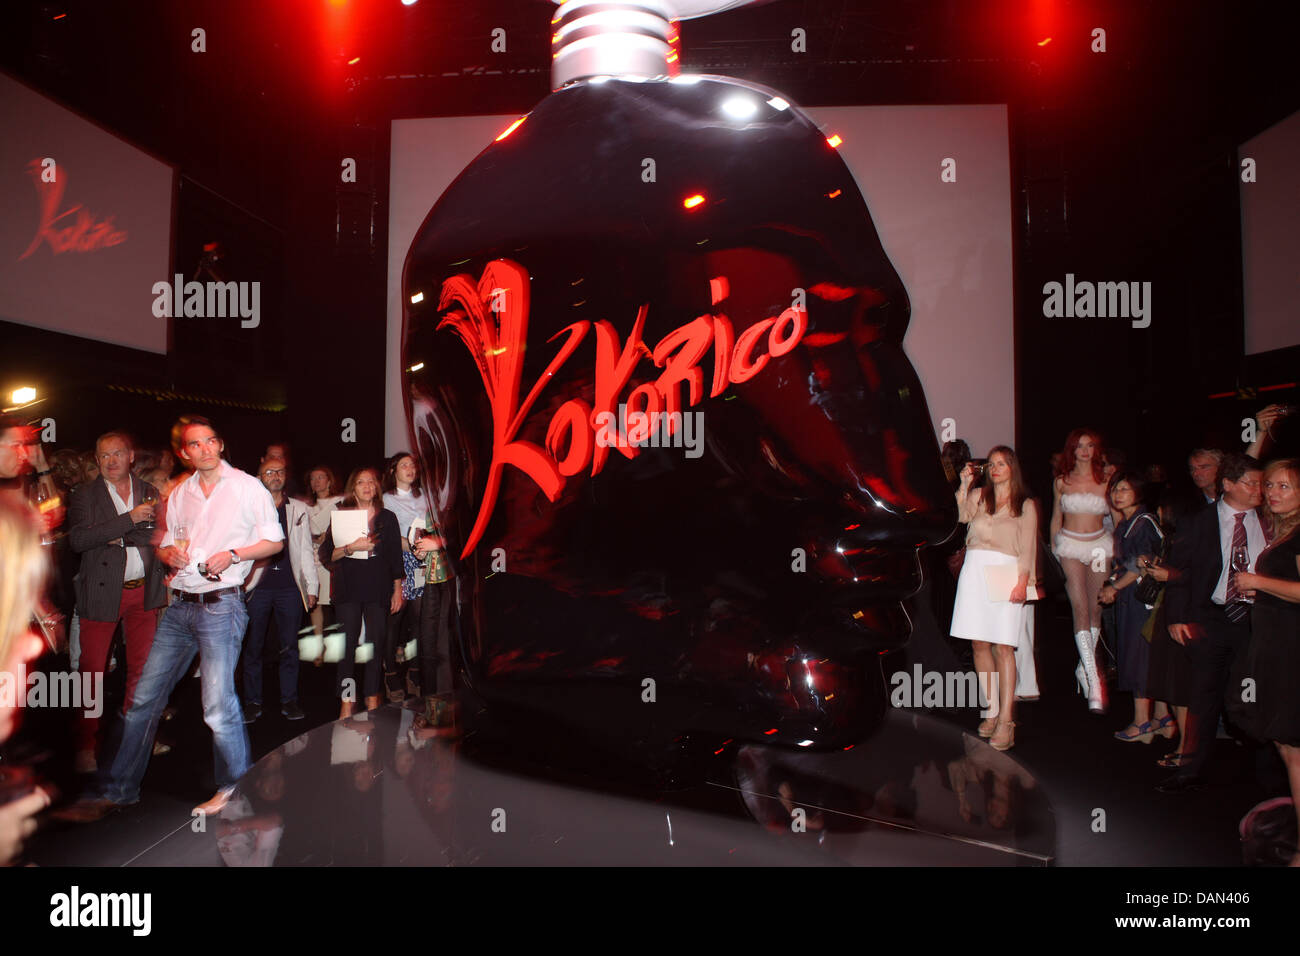 Jean Paul Gaultier presents his new perfume Kokorico at the aftershow party  of his Fall/Winter 2011/2012 Haute Couture collection during the Paris  Fashion Week, in Paris, France, 6 July 2011. The presentation